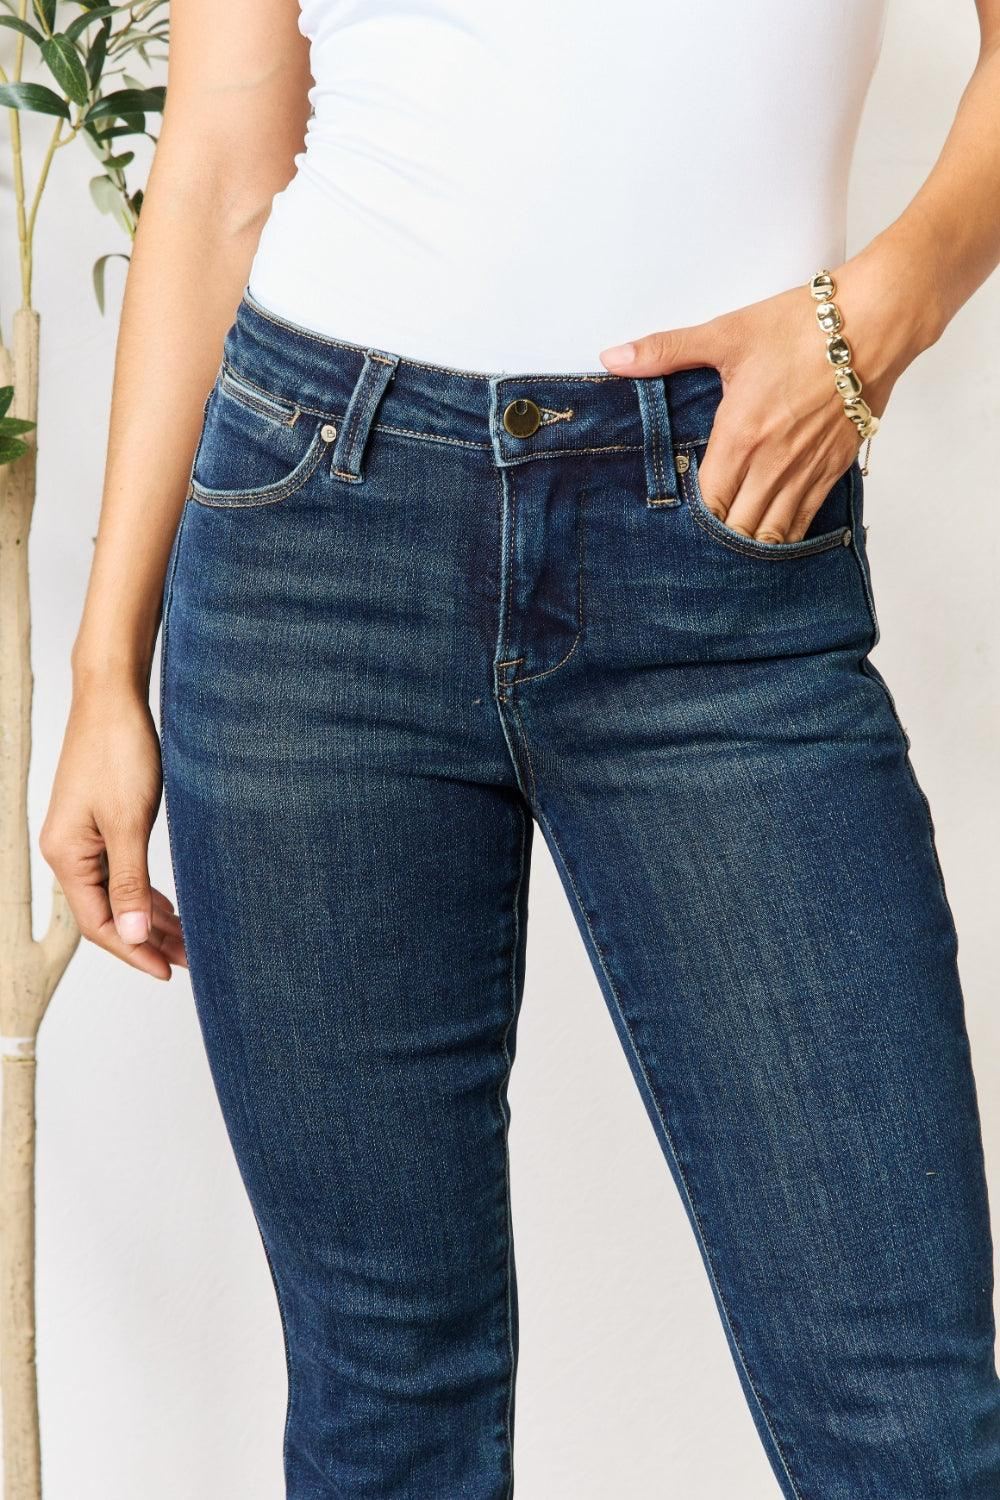 BAYEAS - Raw Hem Cropped Jeans - Inspired Eye Boutique